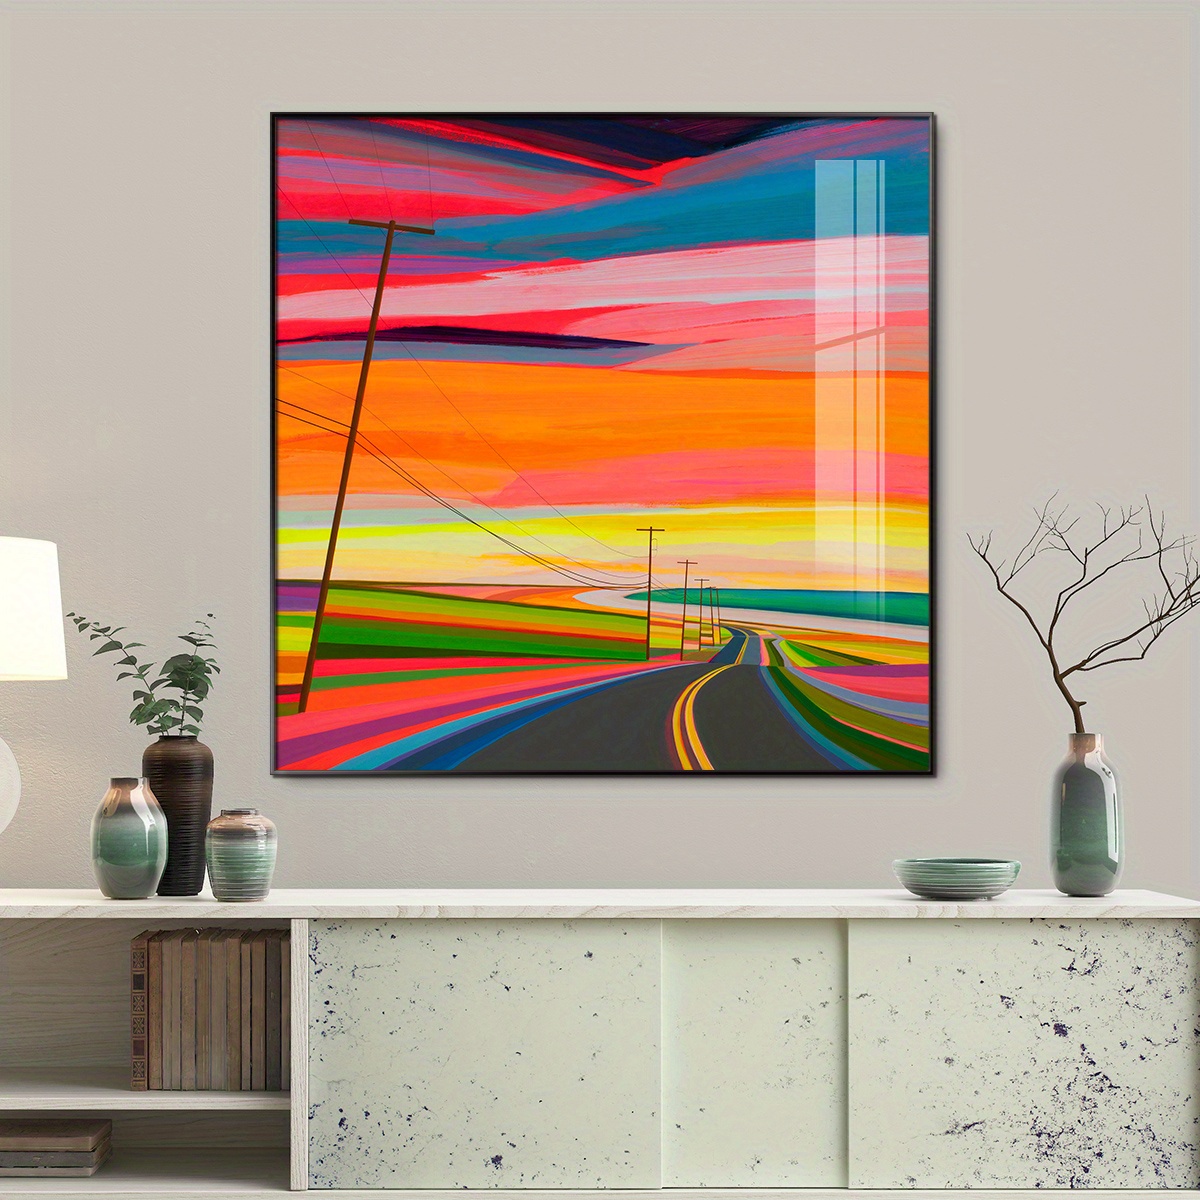 

1pc Framed Canvas Printing Wall Art, Modern Bauhaus The Road Under The Colorful Glow, Wall Art With Waterproof Wooden Back Frame, For Home Room Office Hotel Bar Museum Wall Decoration